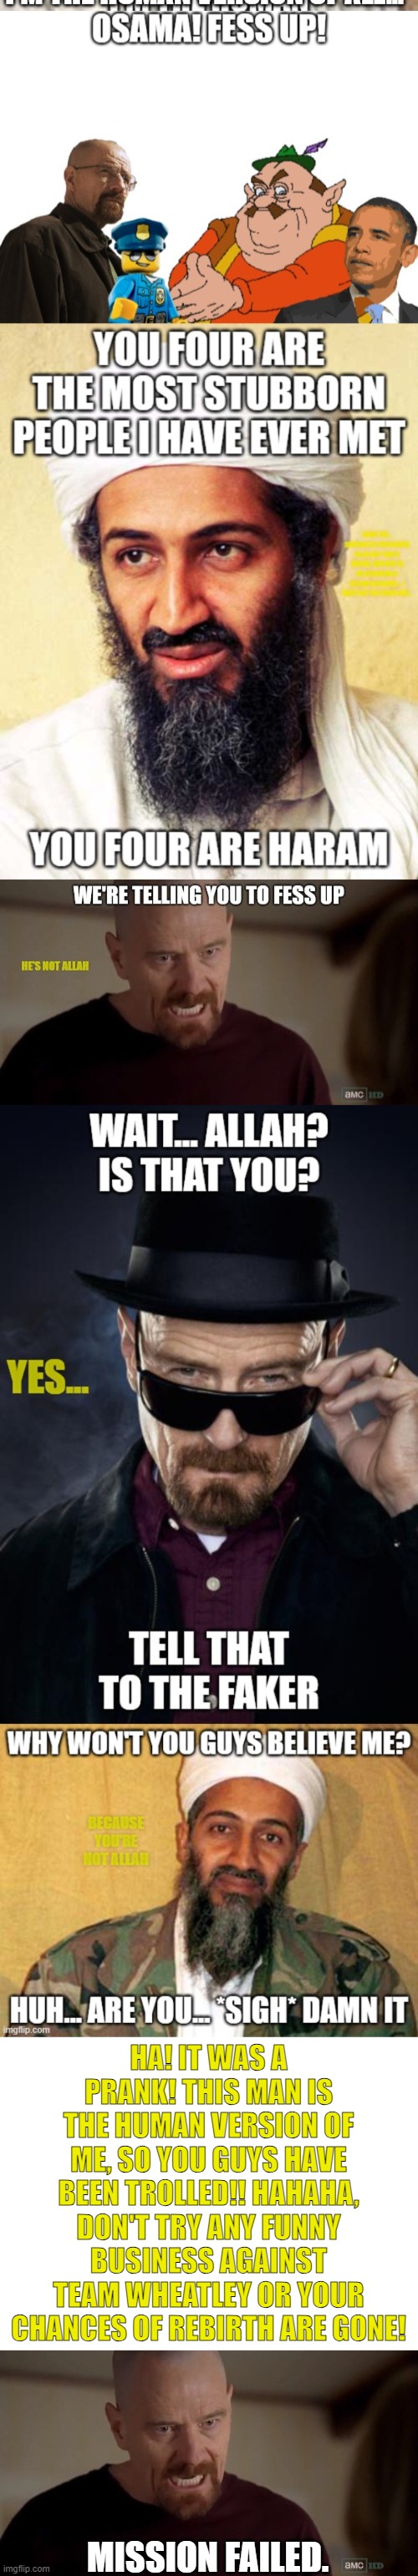 Mission failed | HA! IT WAS A PRANK! THIS MAN IS THE HUMAN VERSION OF ME, SO YOU GUYS HAVE BEEN TROLLED!! HAHAHA, DON'T TRY ANY FUNNY BUSINESS AGAINST TEAM WHEATLEY OR YOUR CHANCES OF REBIRTH ARE GONE! MISSION FAILED. | image tagged in blank white template,i am the one who knocks | made w/ Imgflip meme maker